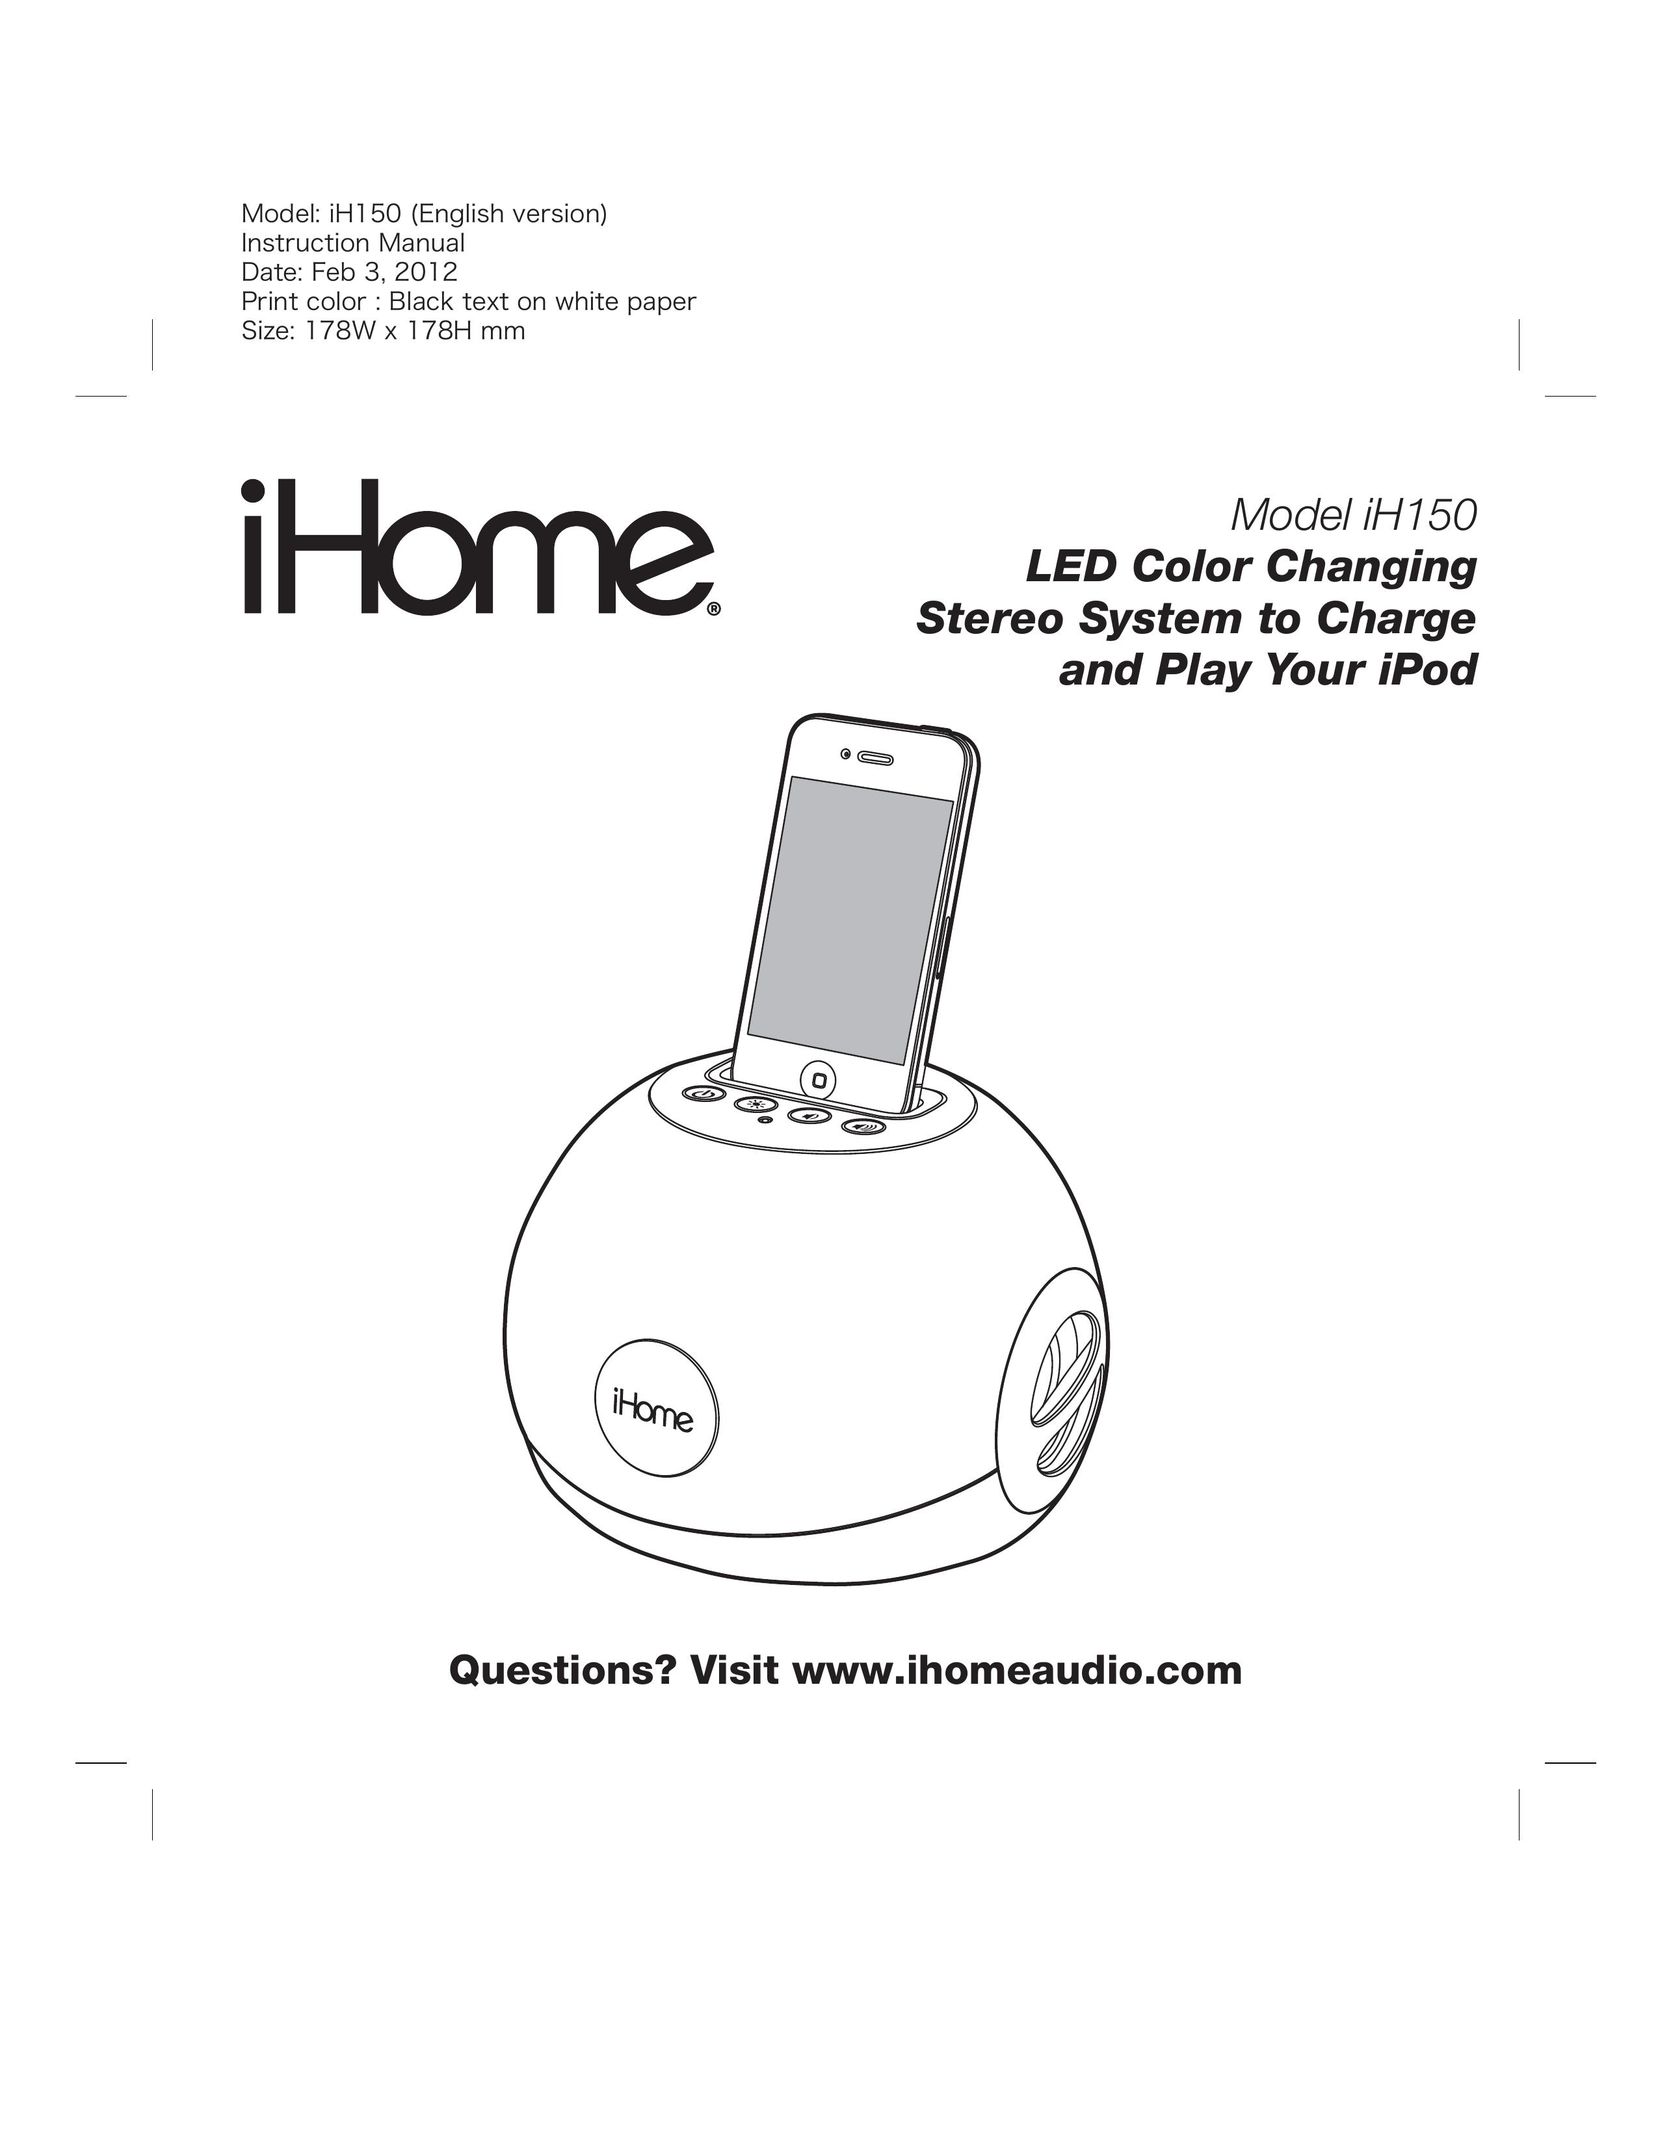 iHome iH150 Video Game Sound System User Manual